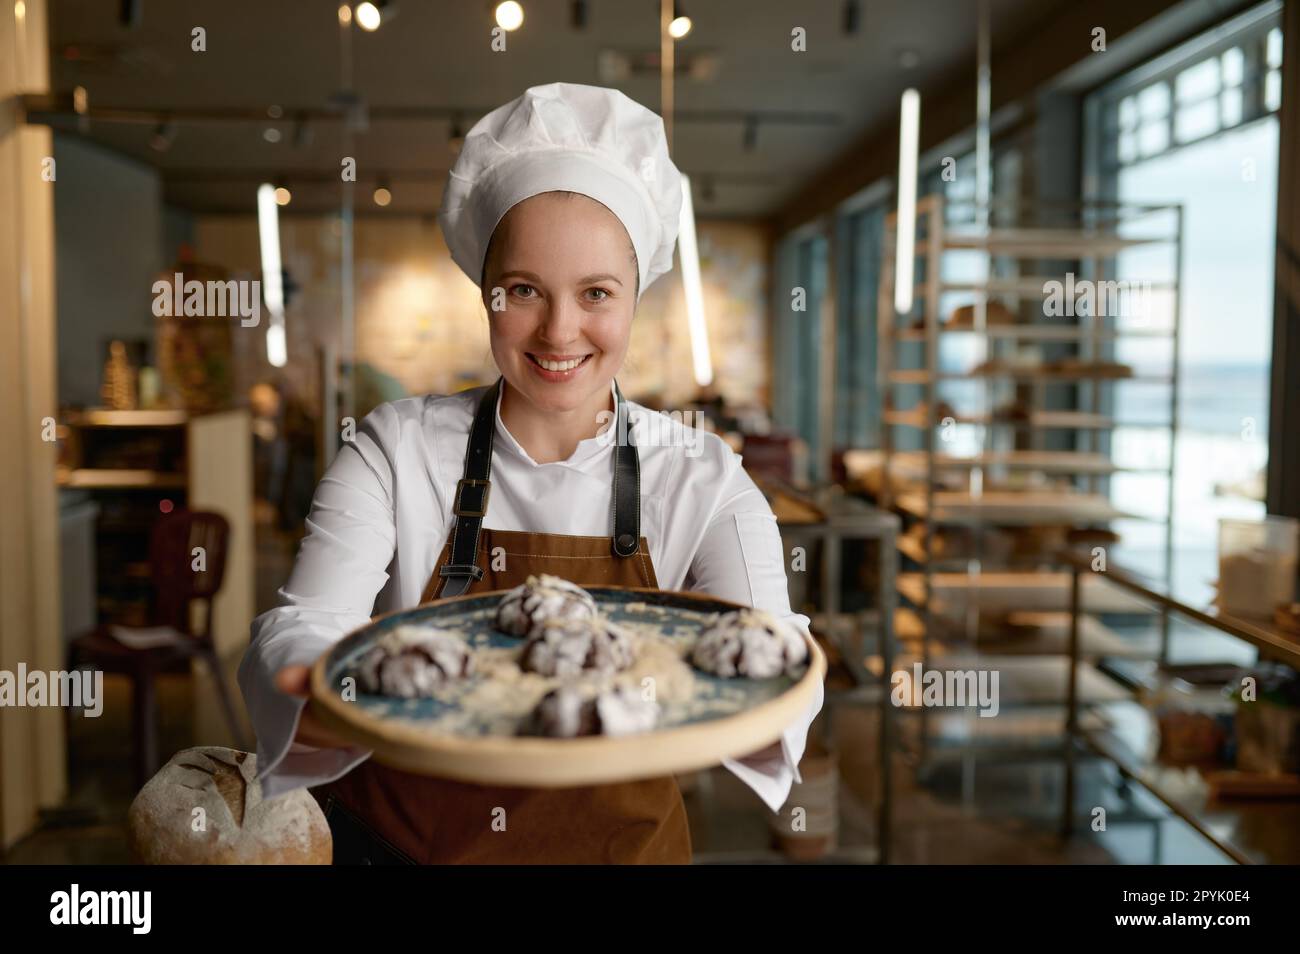 Pastry chef presenting freshly baked cookies at bakery kitchen Stock Photo